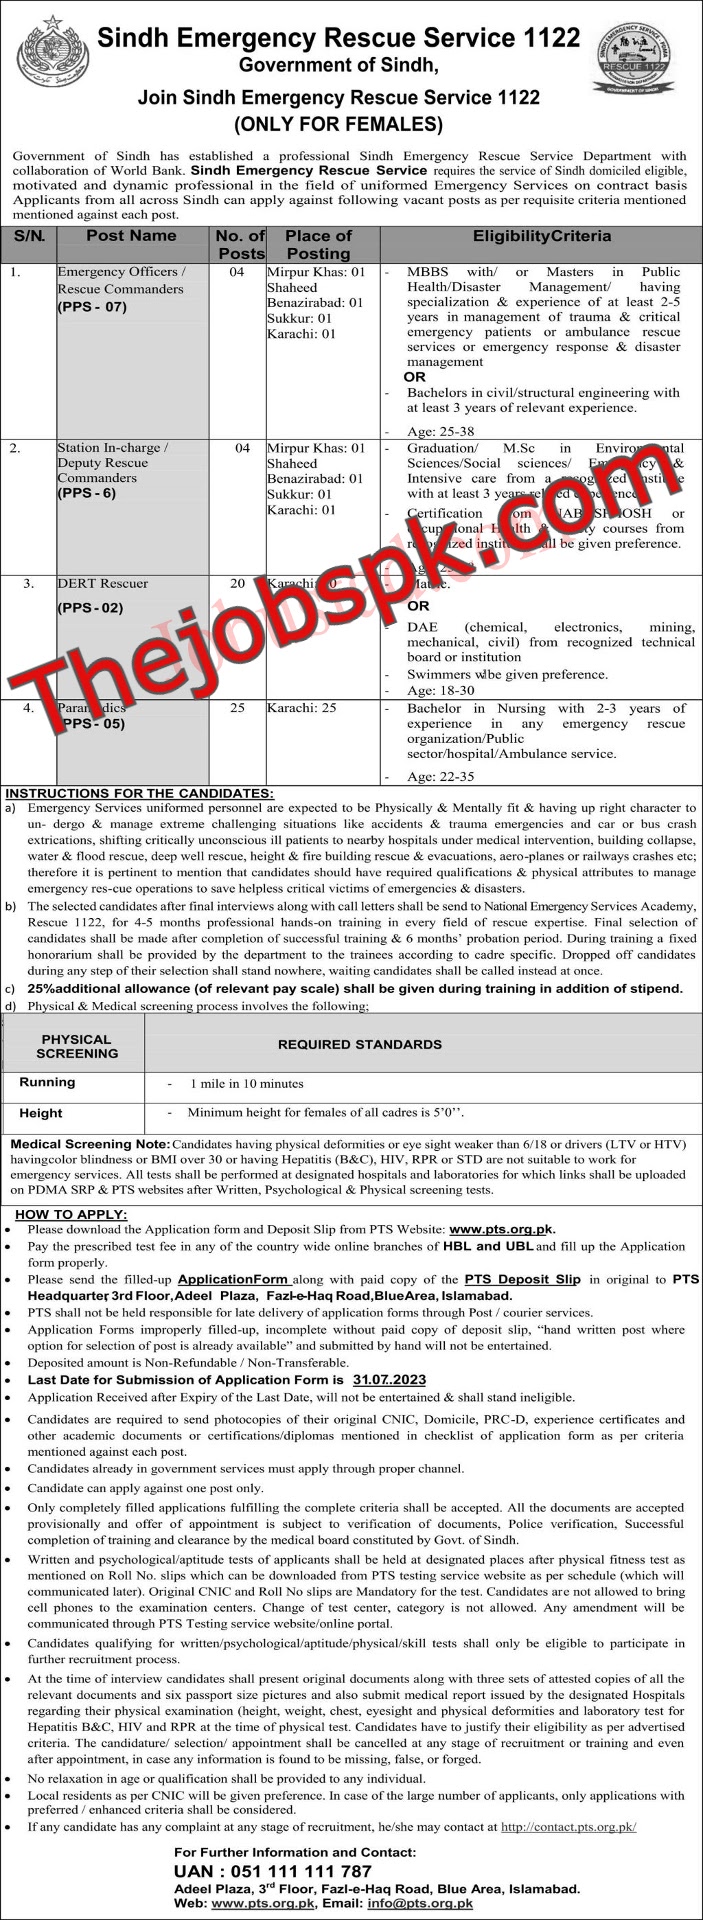 PTS Announces Sindh 1122 Jobs 2023 - Apply Online for Exciting Careers